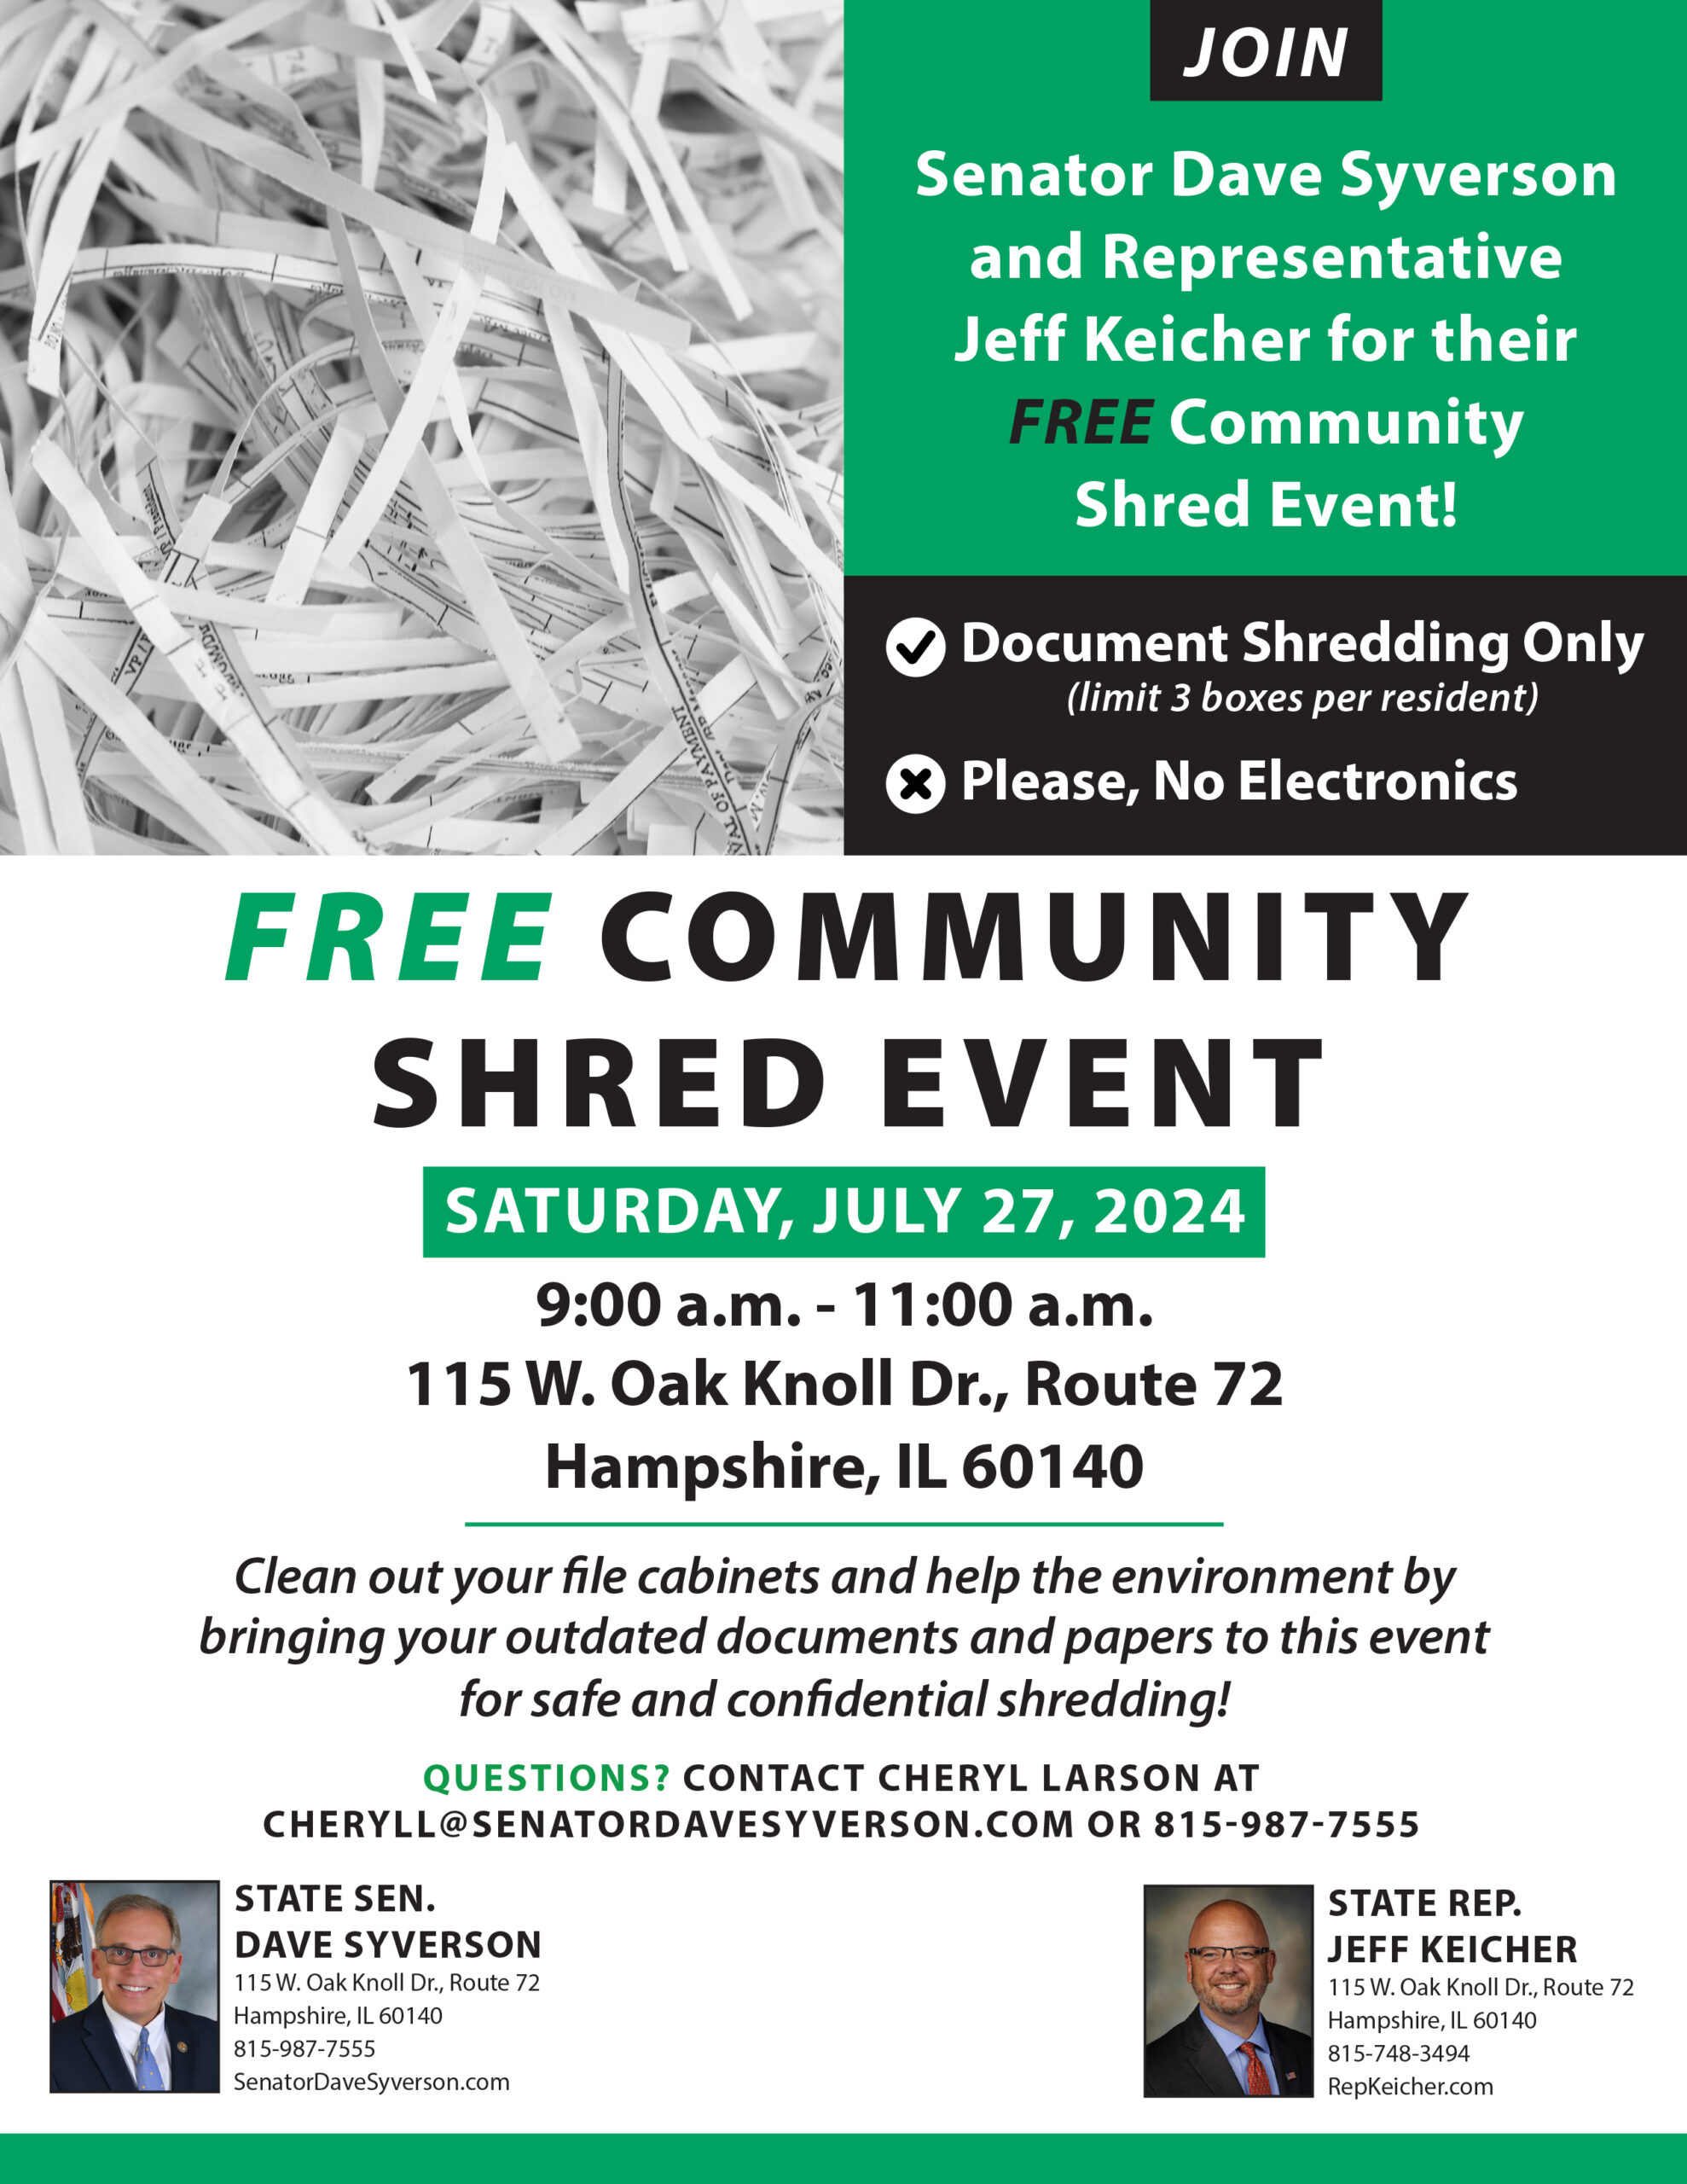 FREE Community Shred Event July 27 in Hampshire